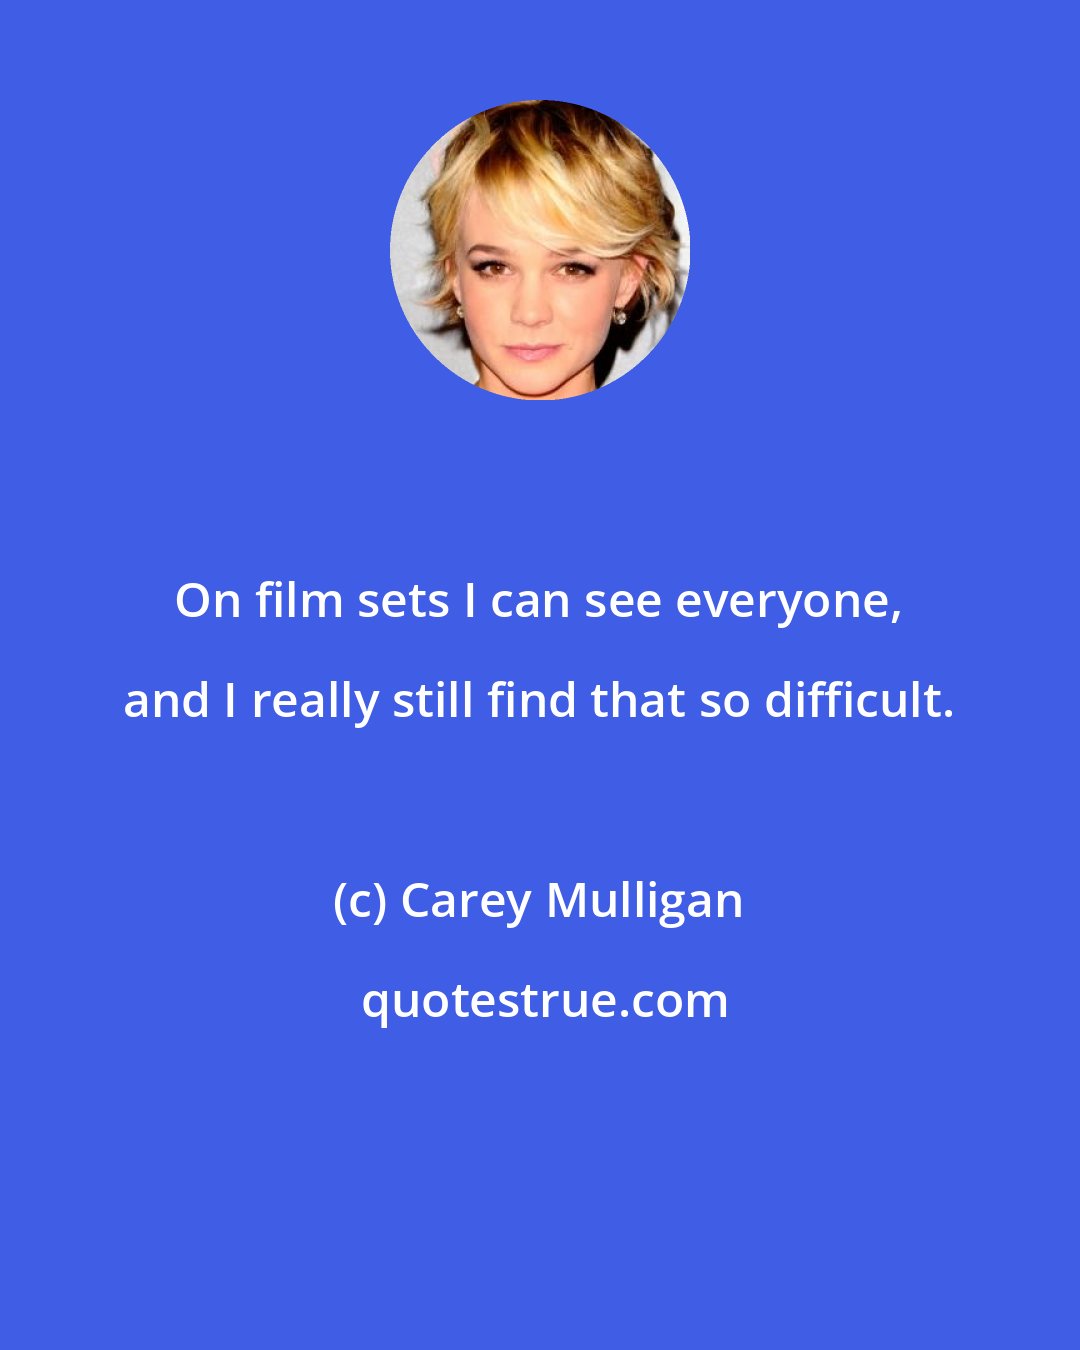 Carey Mulligan: On film sets I can see everyone, and I really still find that so difficult.